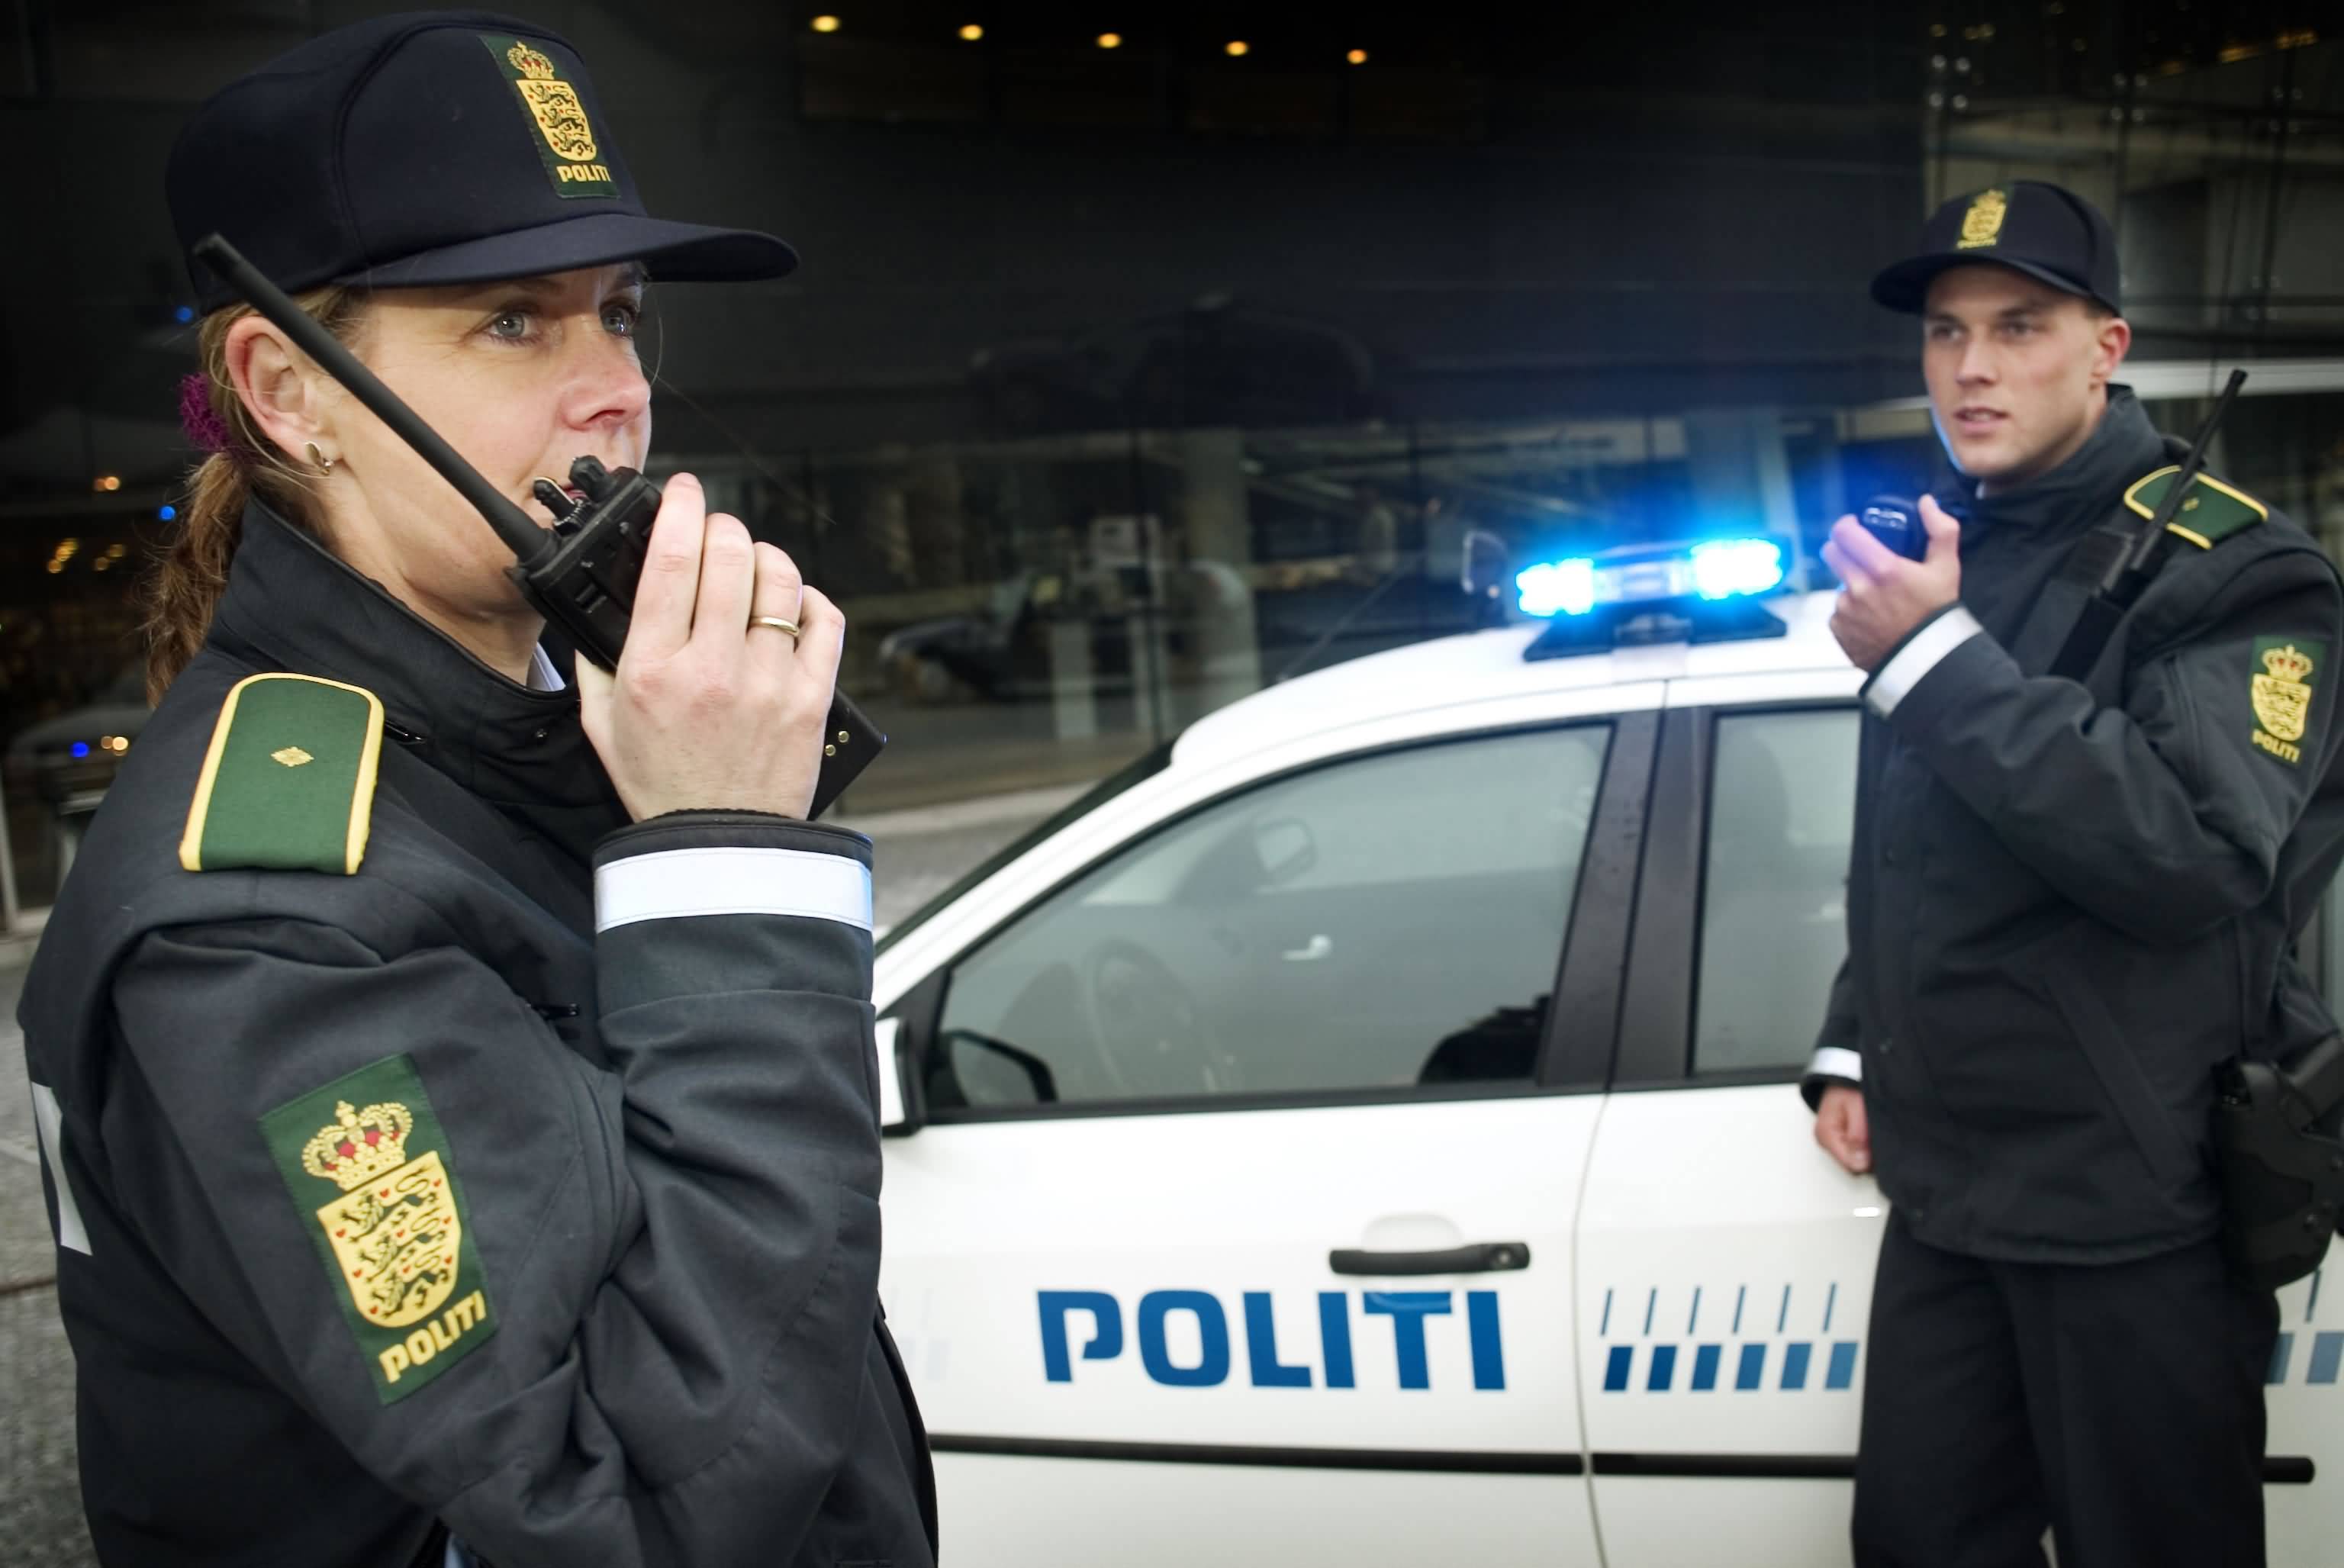 Danish police union rejects criticism of shorter training period